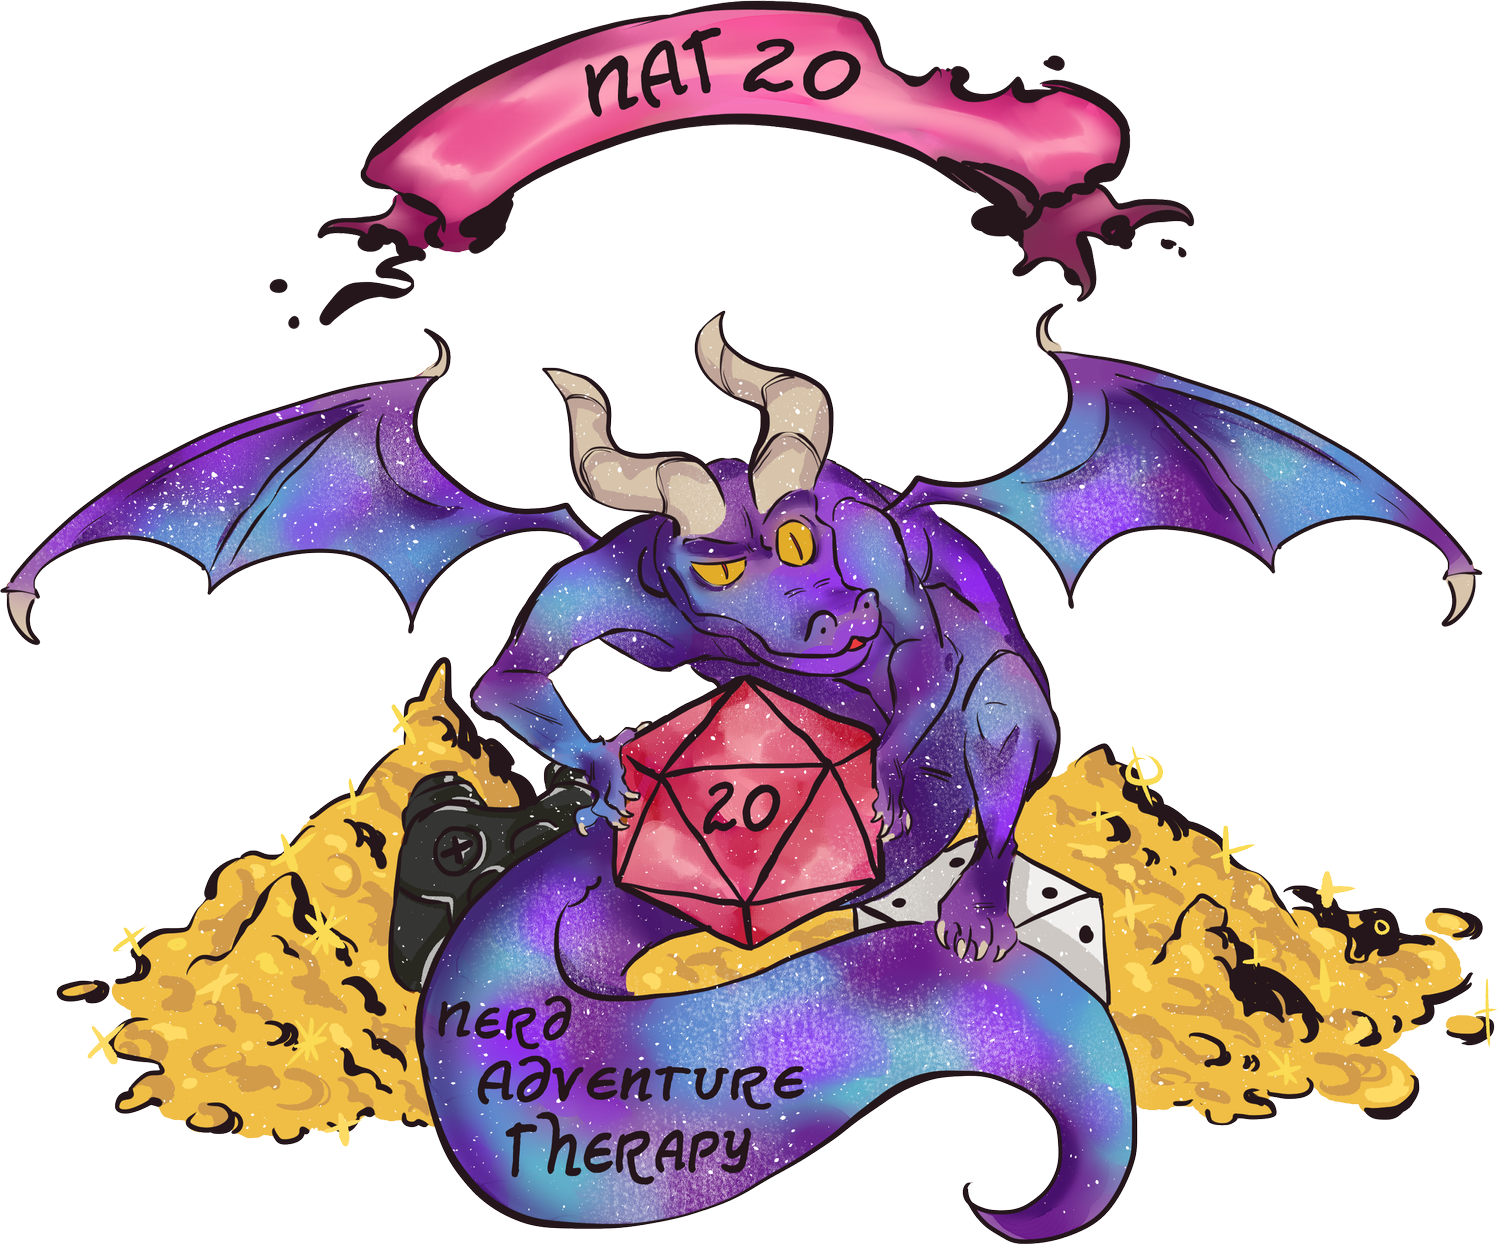 NAT20Therapy